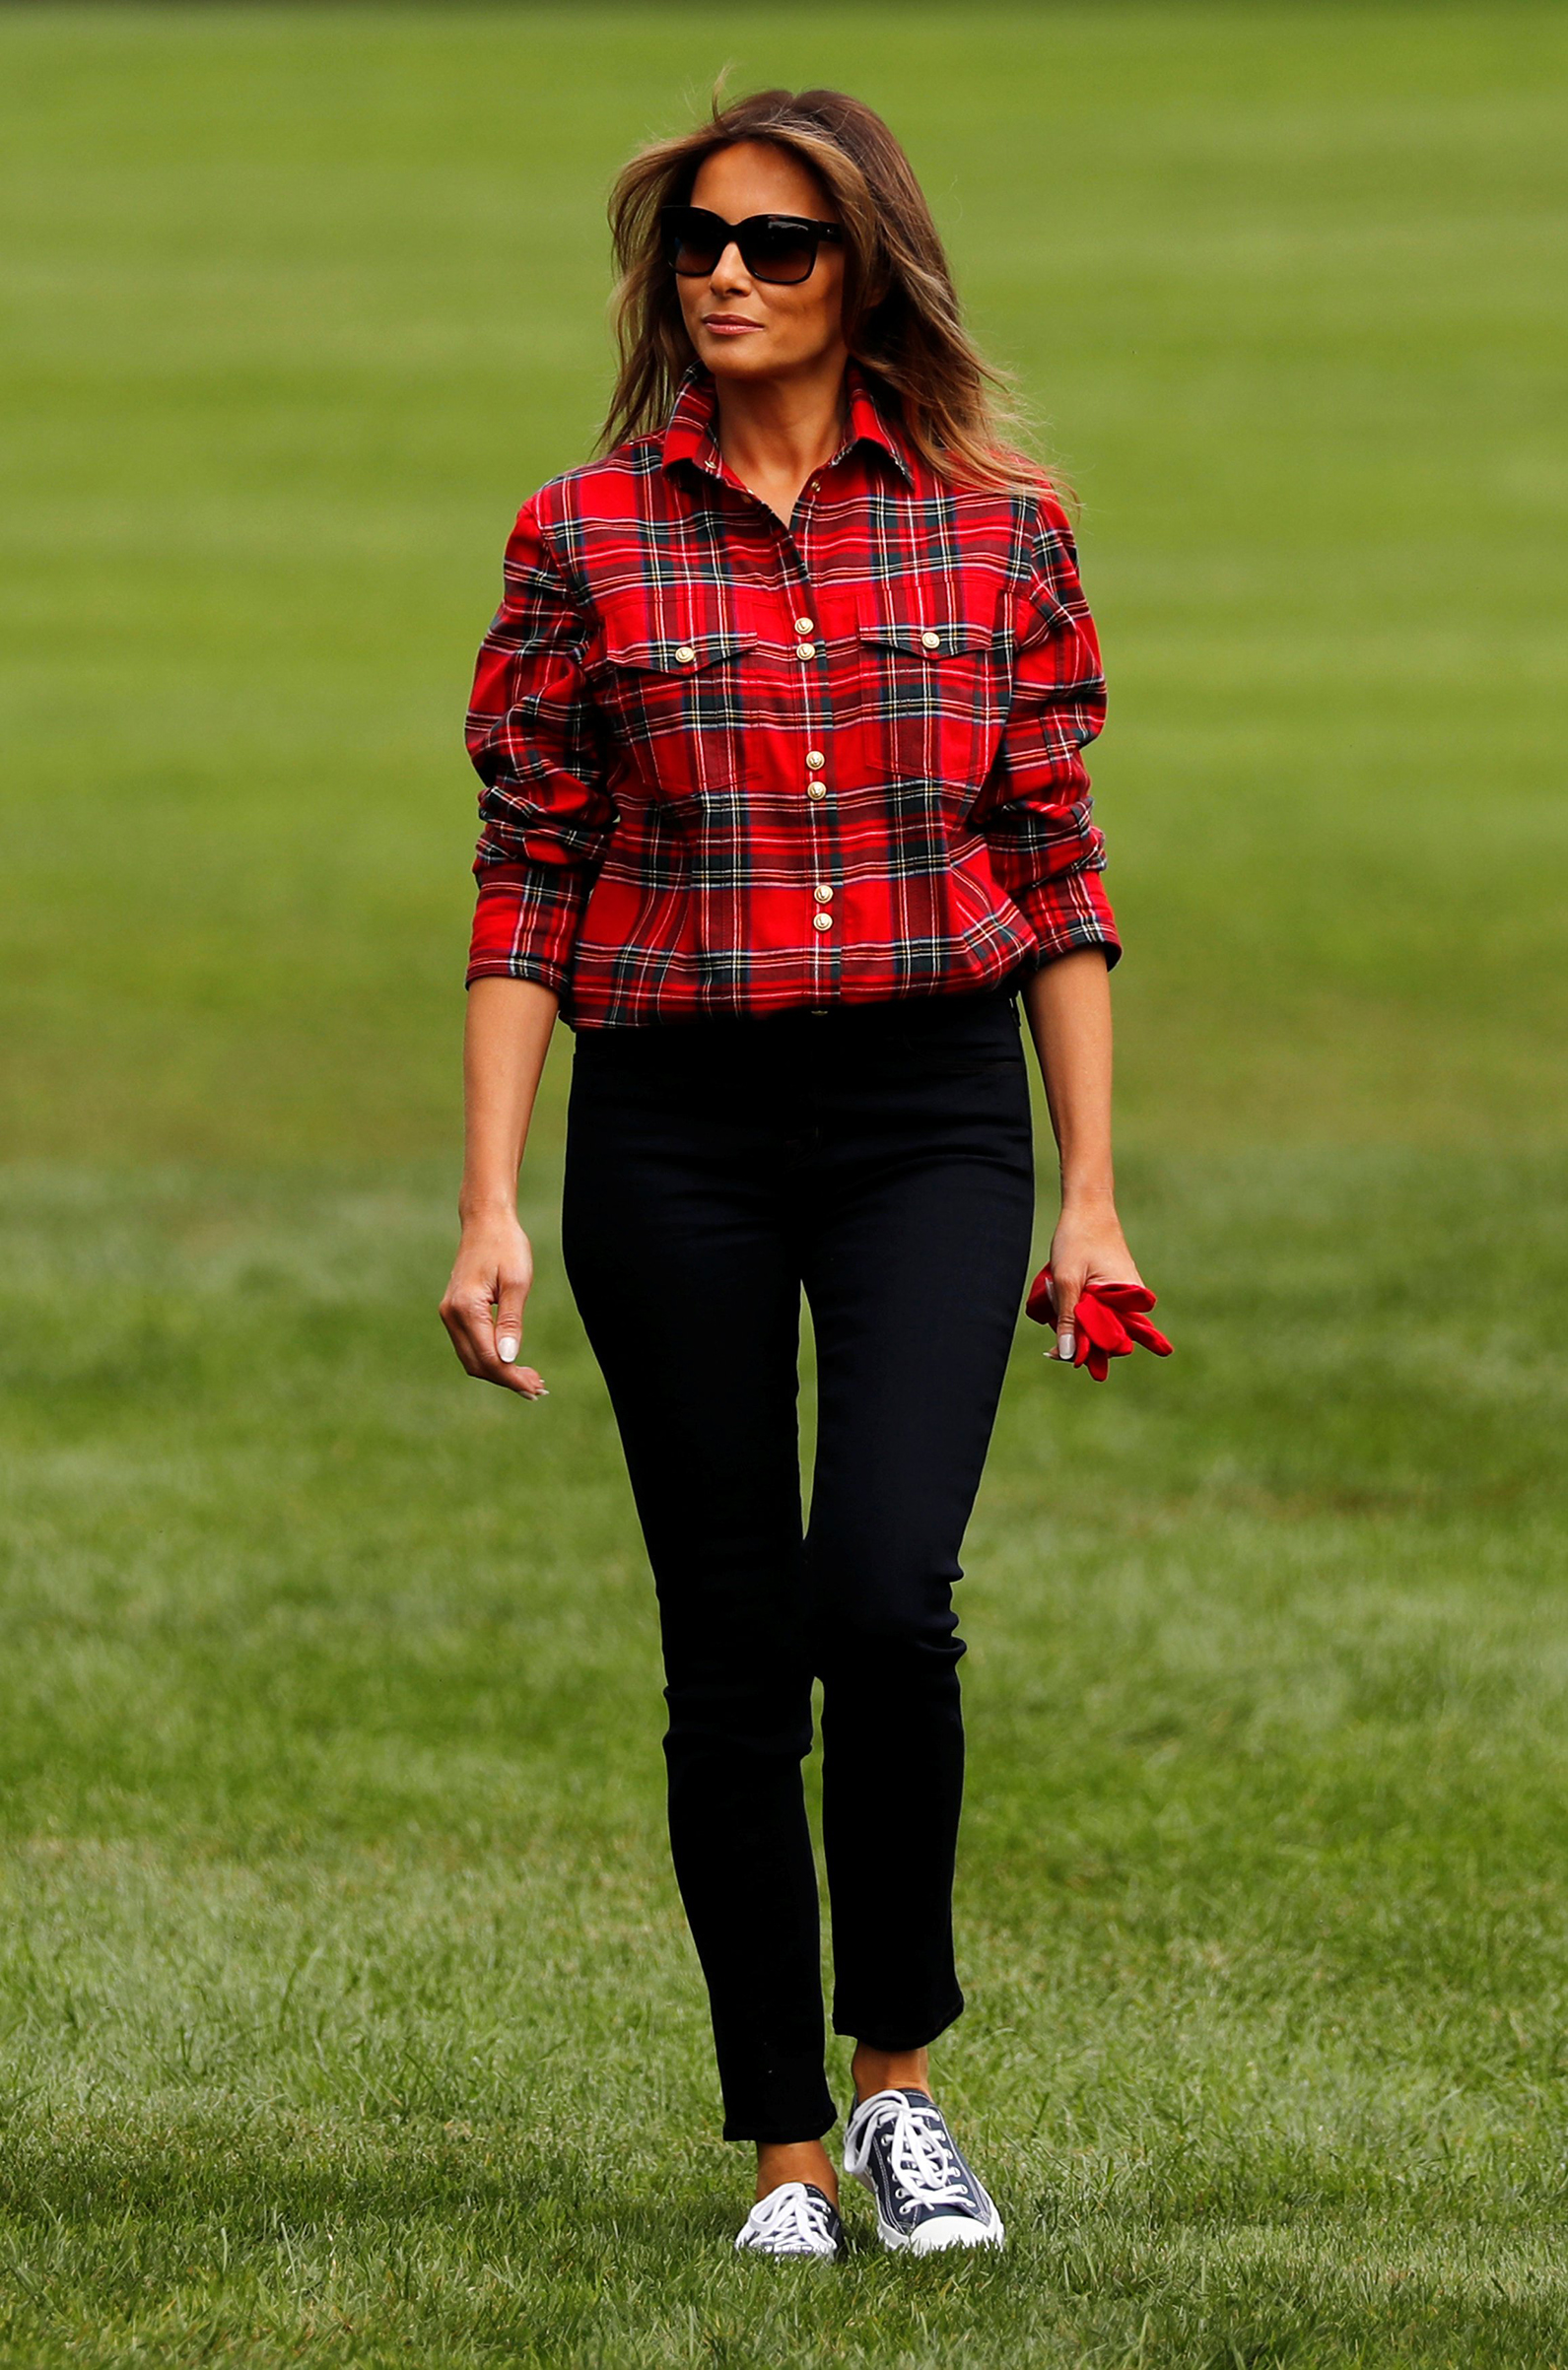 First Lady Melania Trump wearing a tartan Balmain shirt and Converse sneakers, arrives to work in the White House kitchen garden with students from the Boys and Girls Clubs of Greater WFirst Lady Melania Trump wearing a tartan Balmain shirt and Converse sneakers, arrives to work in the White House kitchen garden with students from the Boys and Girls Clubs of Greater Washington, U.S. Sept. 22, 2017.